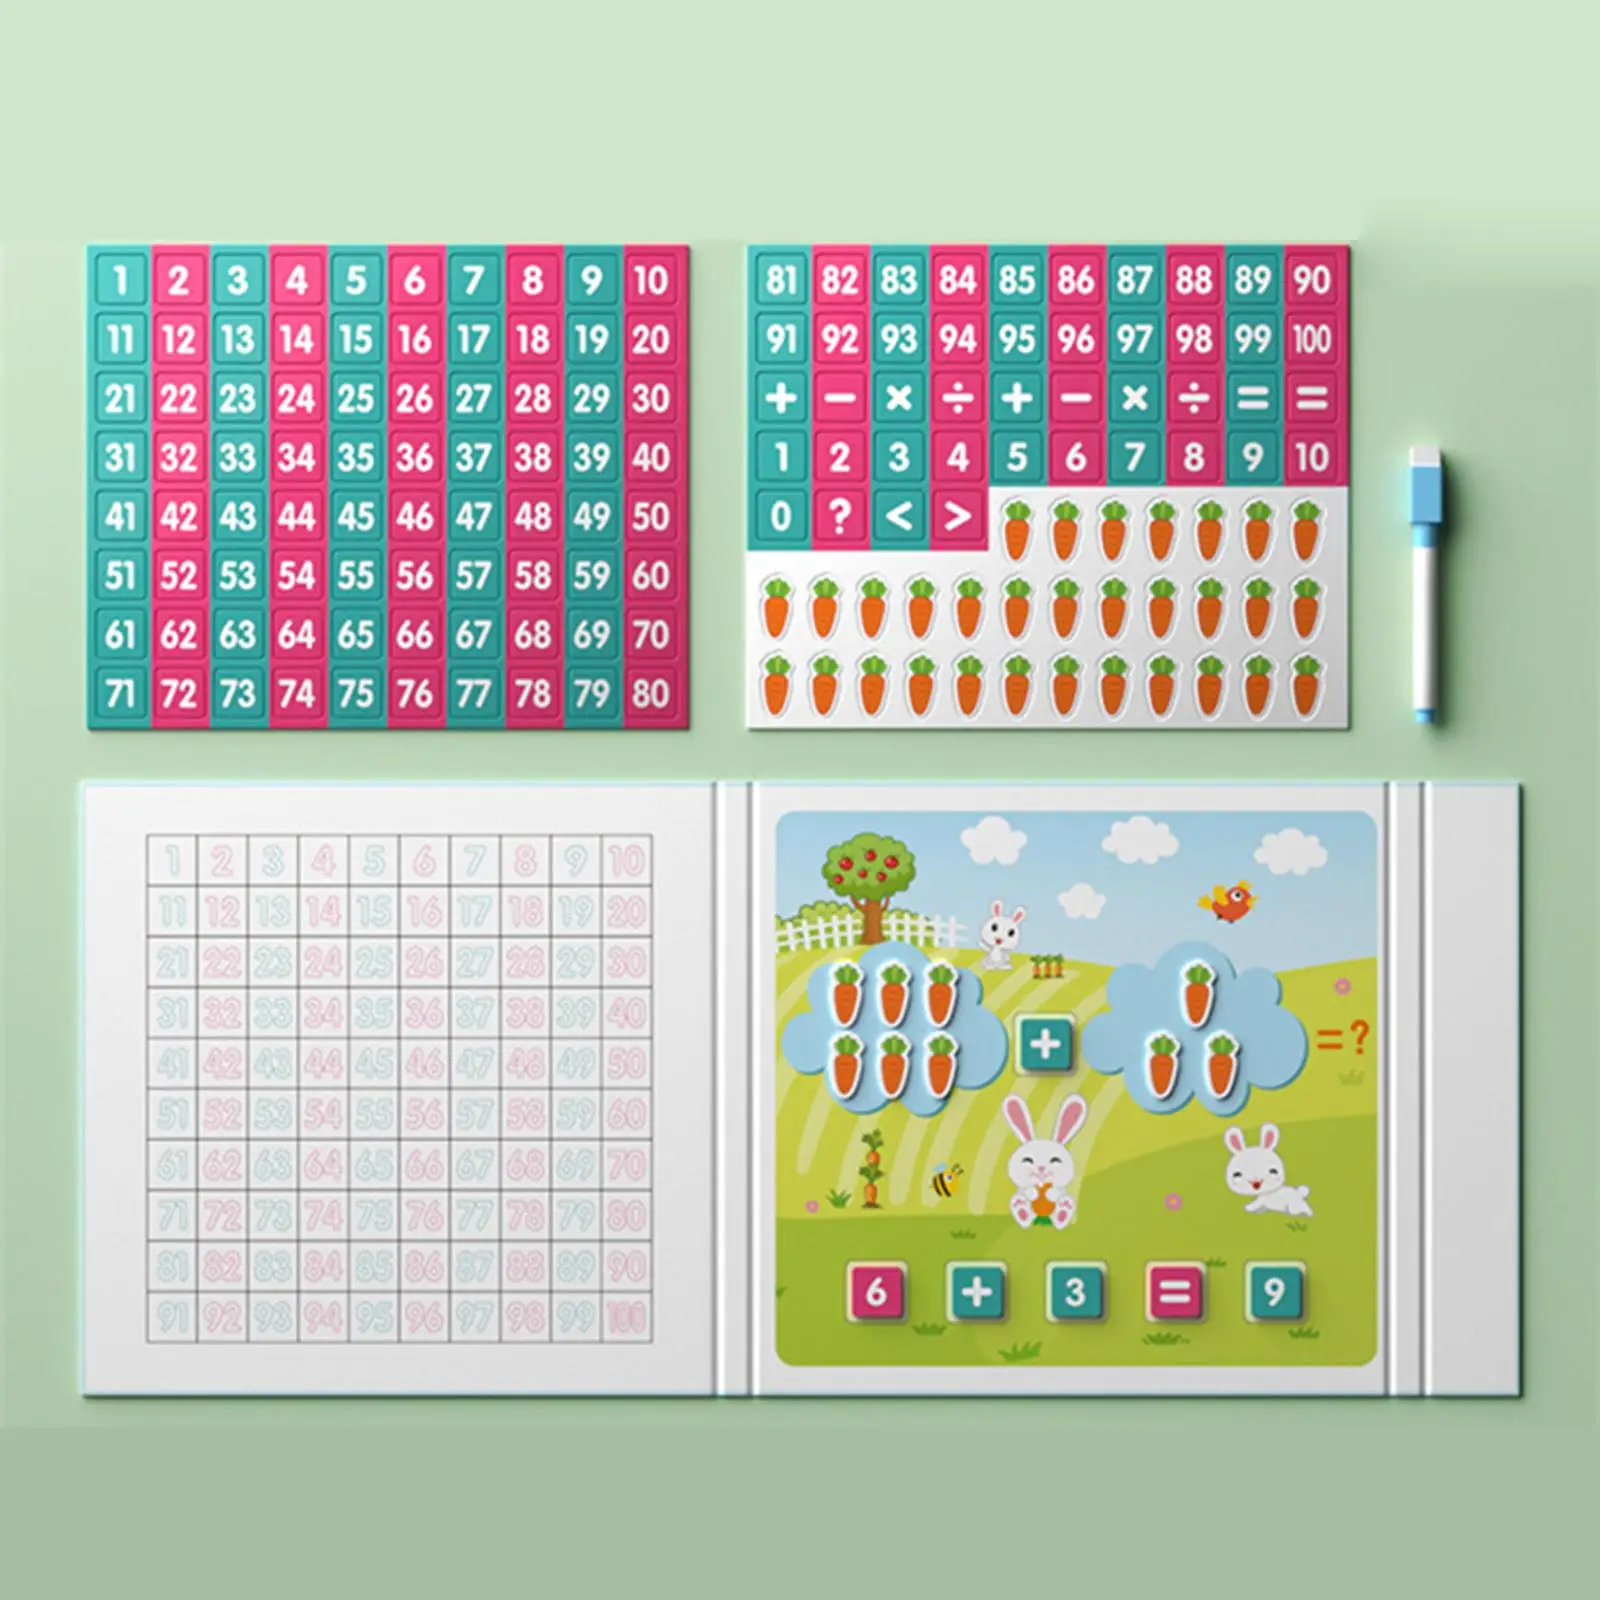 Hundred Number Board Set Arithmetic Teaching Aids Montessori Numbers Decomposition for Kindergarten Elementary girls Boy